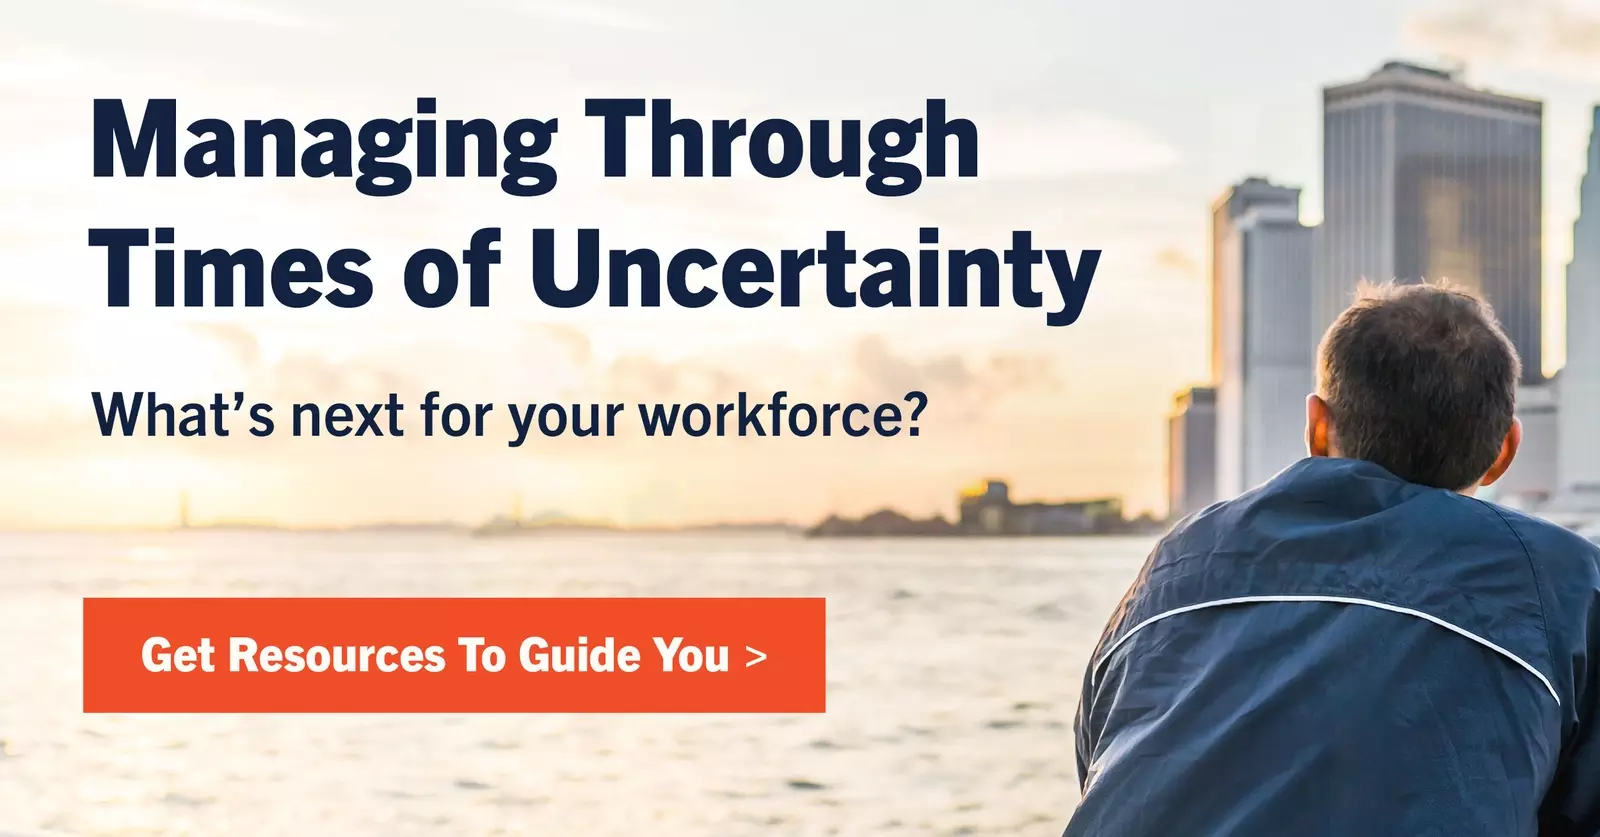 Managing through uncertainty psychological impact of returning to work banner